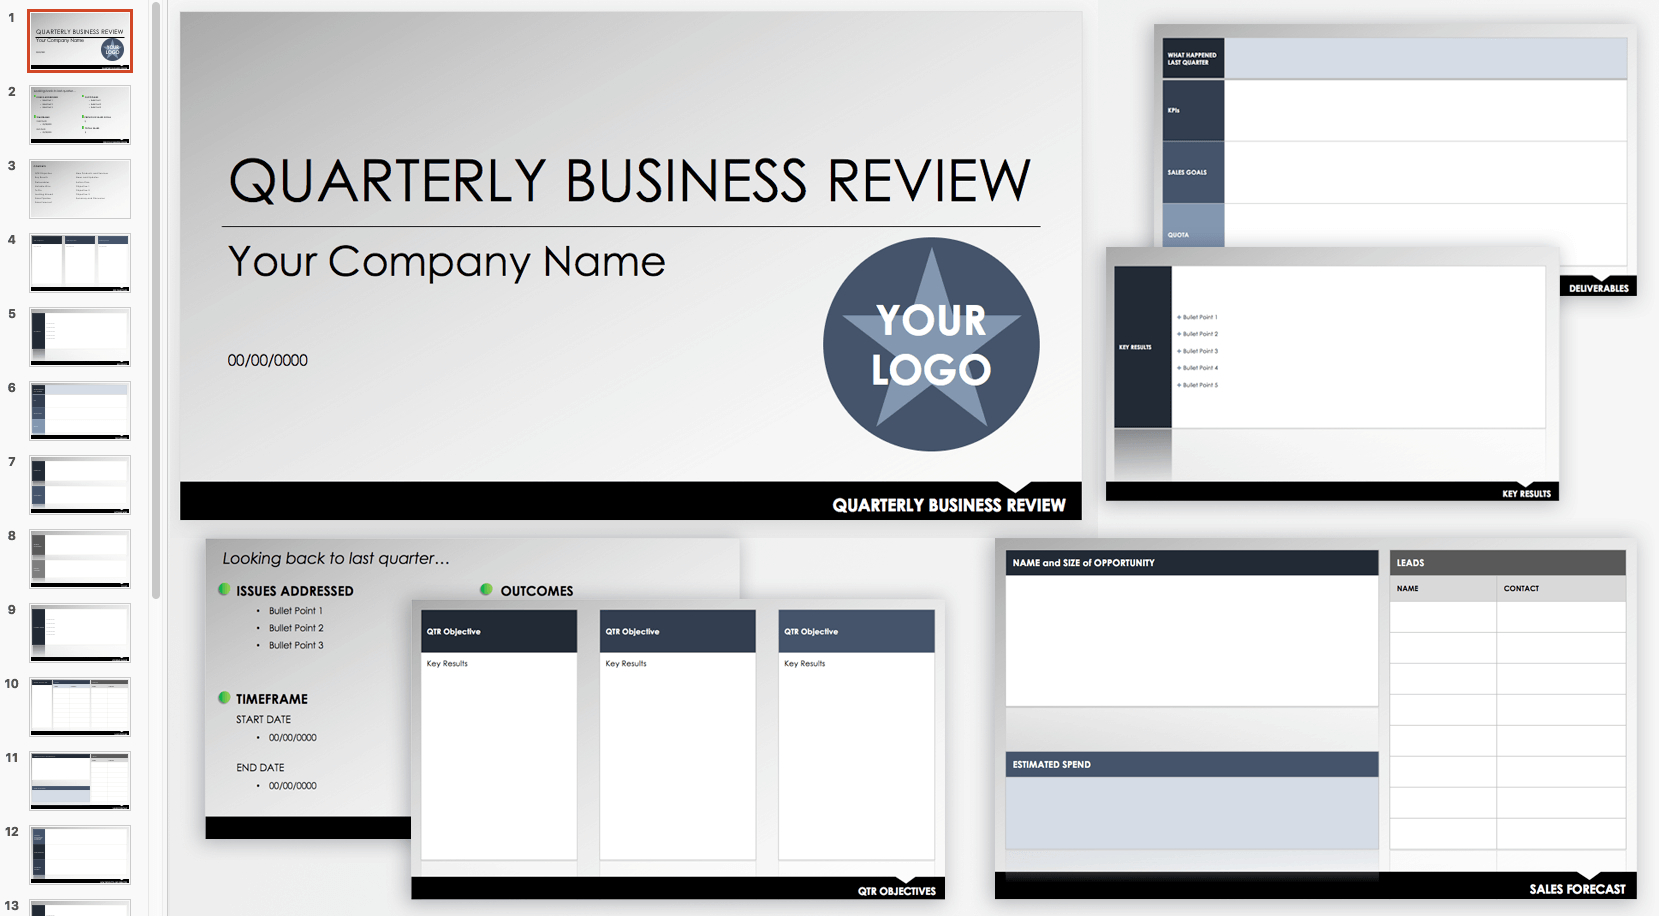 Free Qbr And Business Review Templates | Smartsheet Throughout Business Review Report Template